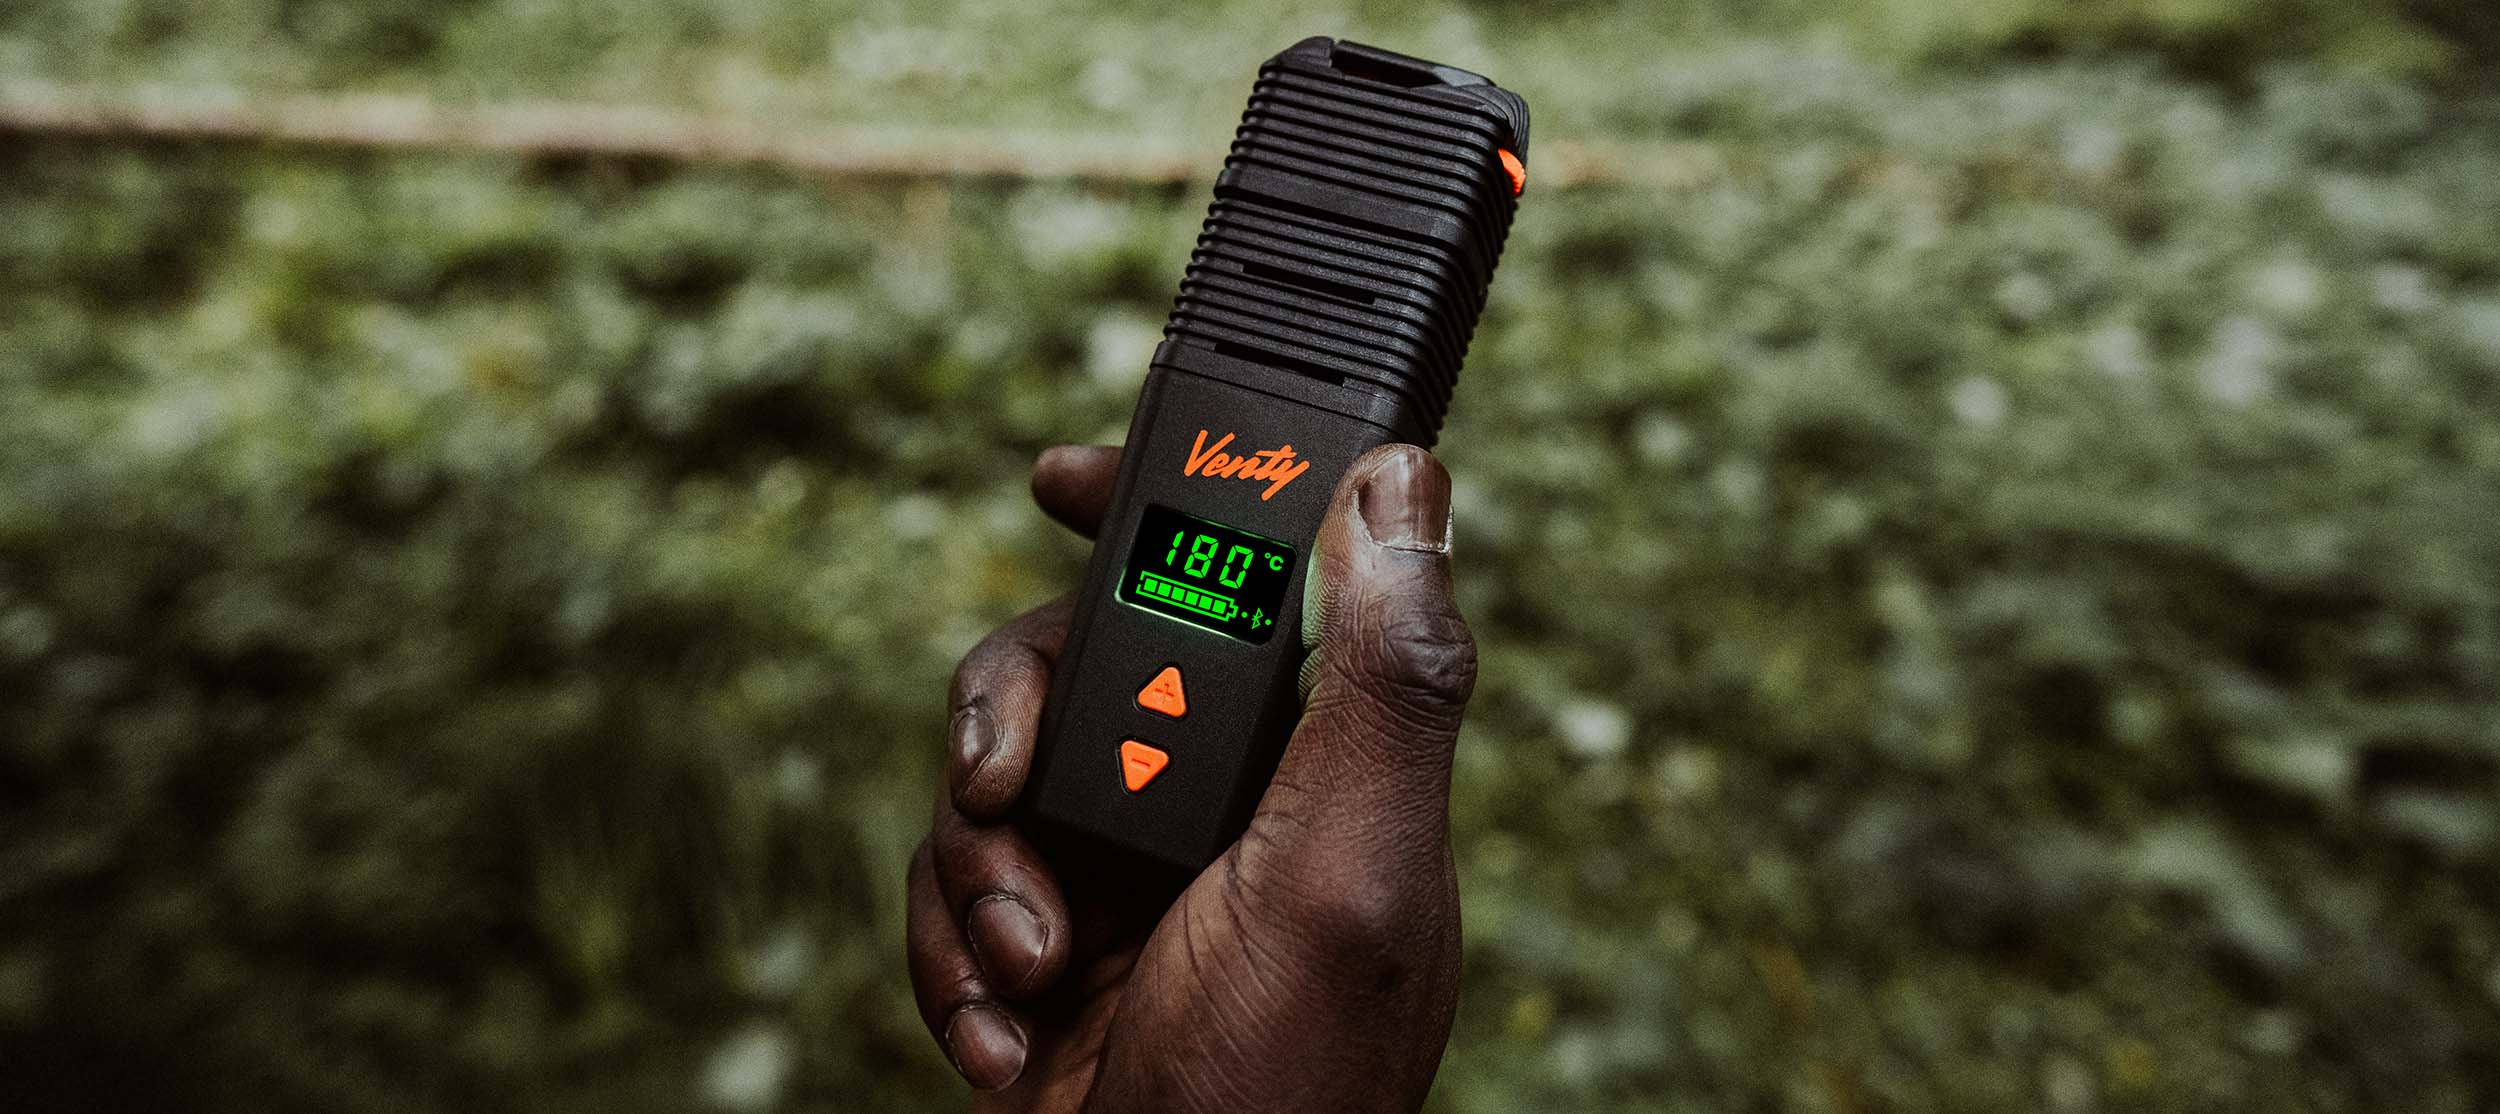 A Full Test and Review of the VENTY Vaporizer by VapoShop